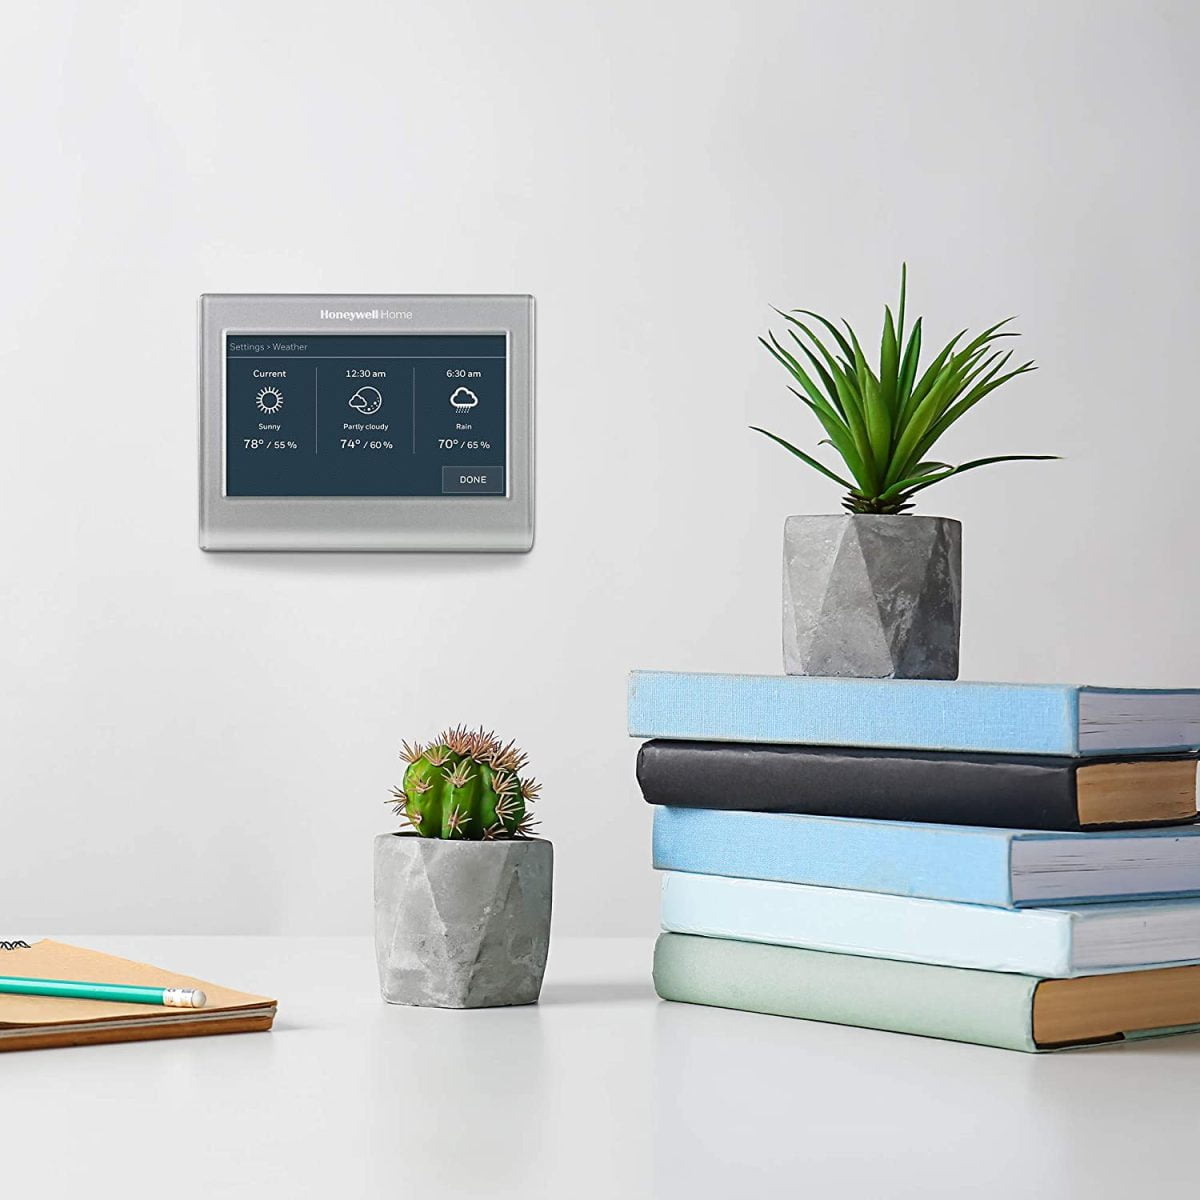 71Bvl0Gbw8L. Ac Sl1500 Honeywell &Lt;H1&Gt;Honeywell Home - Smart Color Thermostat With Wi-Fi Connectivity - Gray&Lt;/H1&Gt; Completely Customize Your Wi-Fi Smart Color Thermostat To Match Your Lifestyle And Decor. The Energy Star® Certified Smart Thermostat Lets You Choose The Temperature, Schedule, Display Color And The Devices You Use To Control It All. &Lt;Strong&Gt;&Lt;Span Class=&Quot;A-List-Item&Quot;&Gt; &Lt;B&Gt;We Also Provide International Wholesale And Retail Shipping To All Gcc Countries: Saudi Arabia, Qatar, Oman, Kuwait, Bahrain.&Lt;/B&Gt;&Lt;/Span&Gt;&Lt;/Strong&Gt; Honeywell Home Honeywell Home - Smart Color Thermostat With Wi-Fi Connectivity - Gray